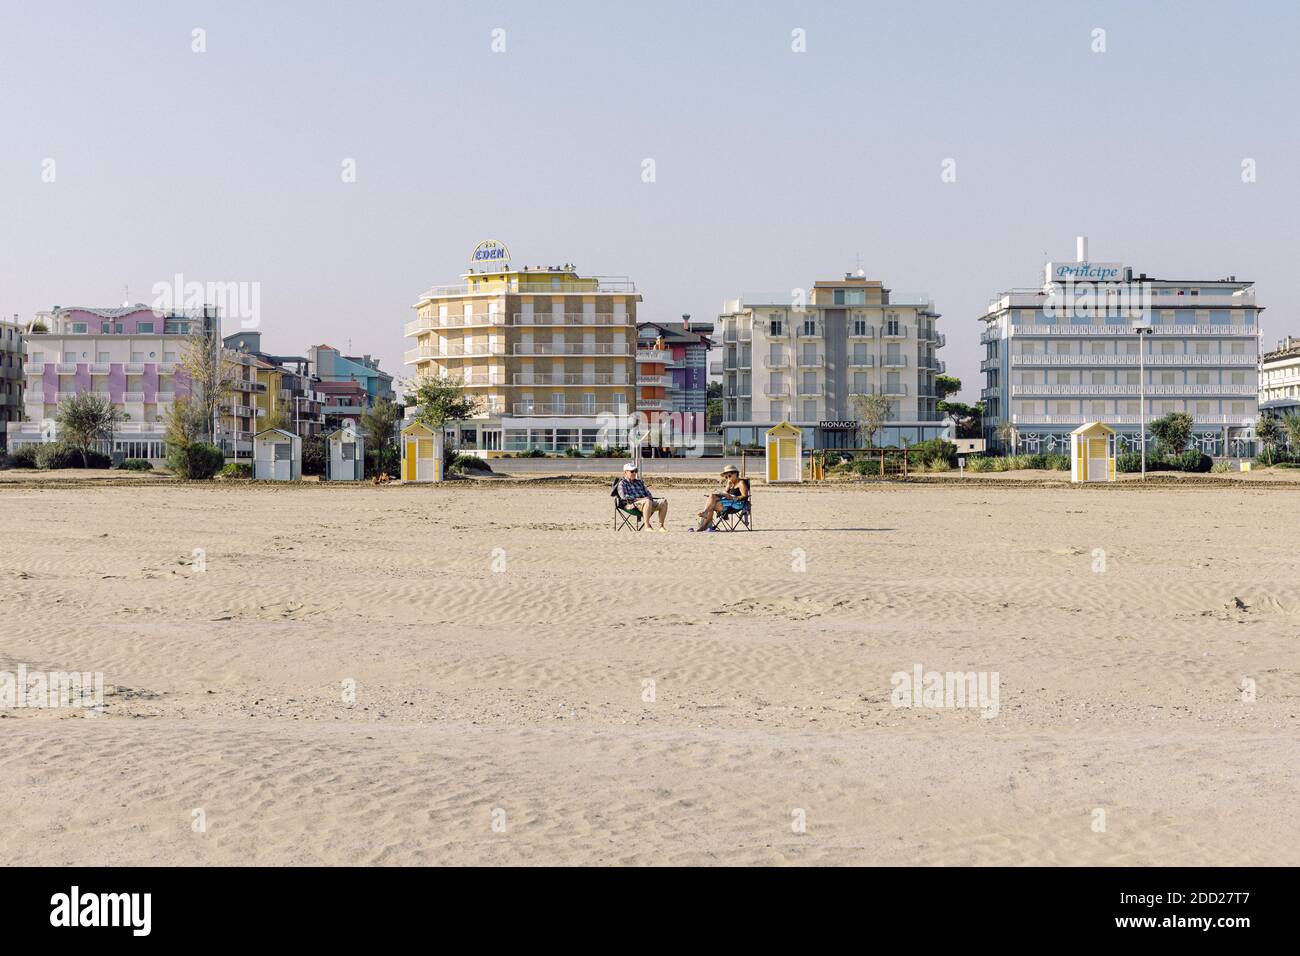 Two old people sitting on a deckchair on a desert beach out of season, with tall buildings and hotels in the background Stock Photo